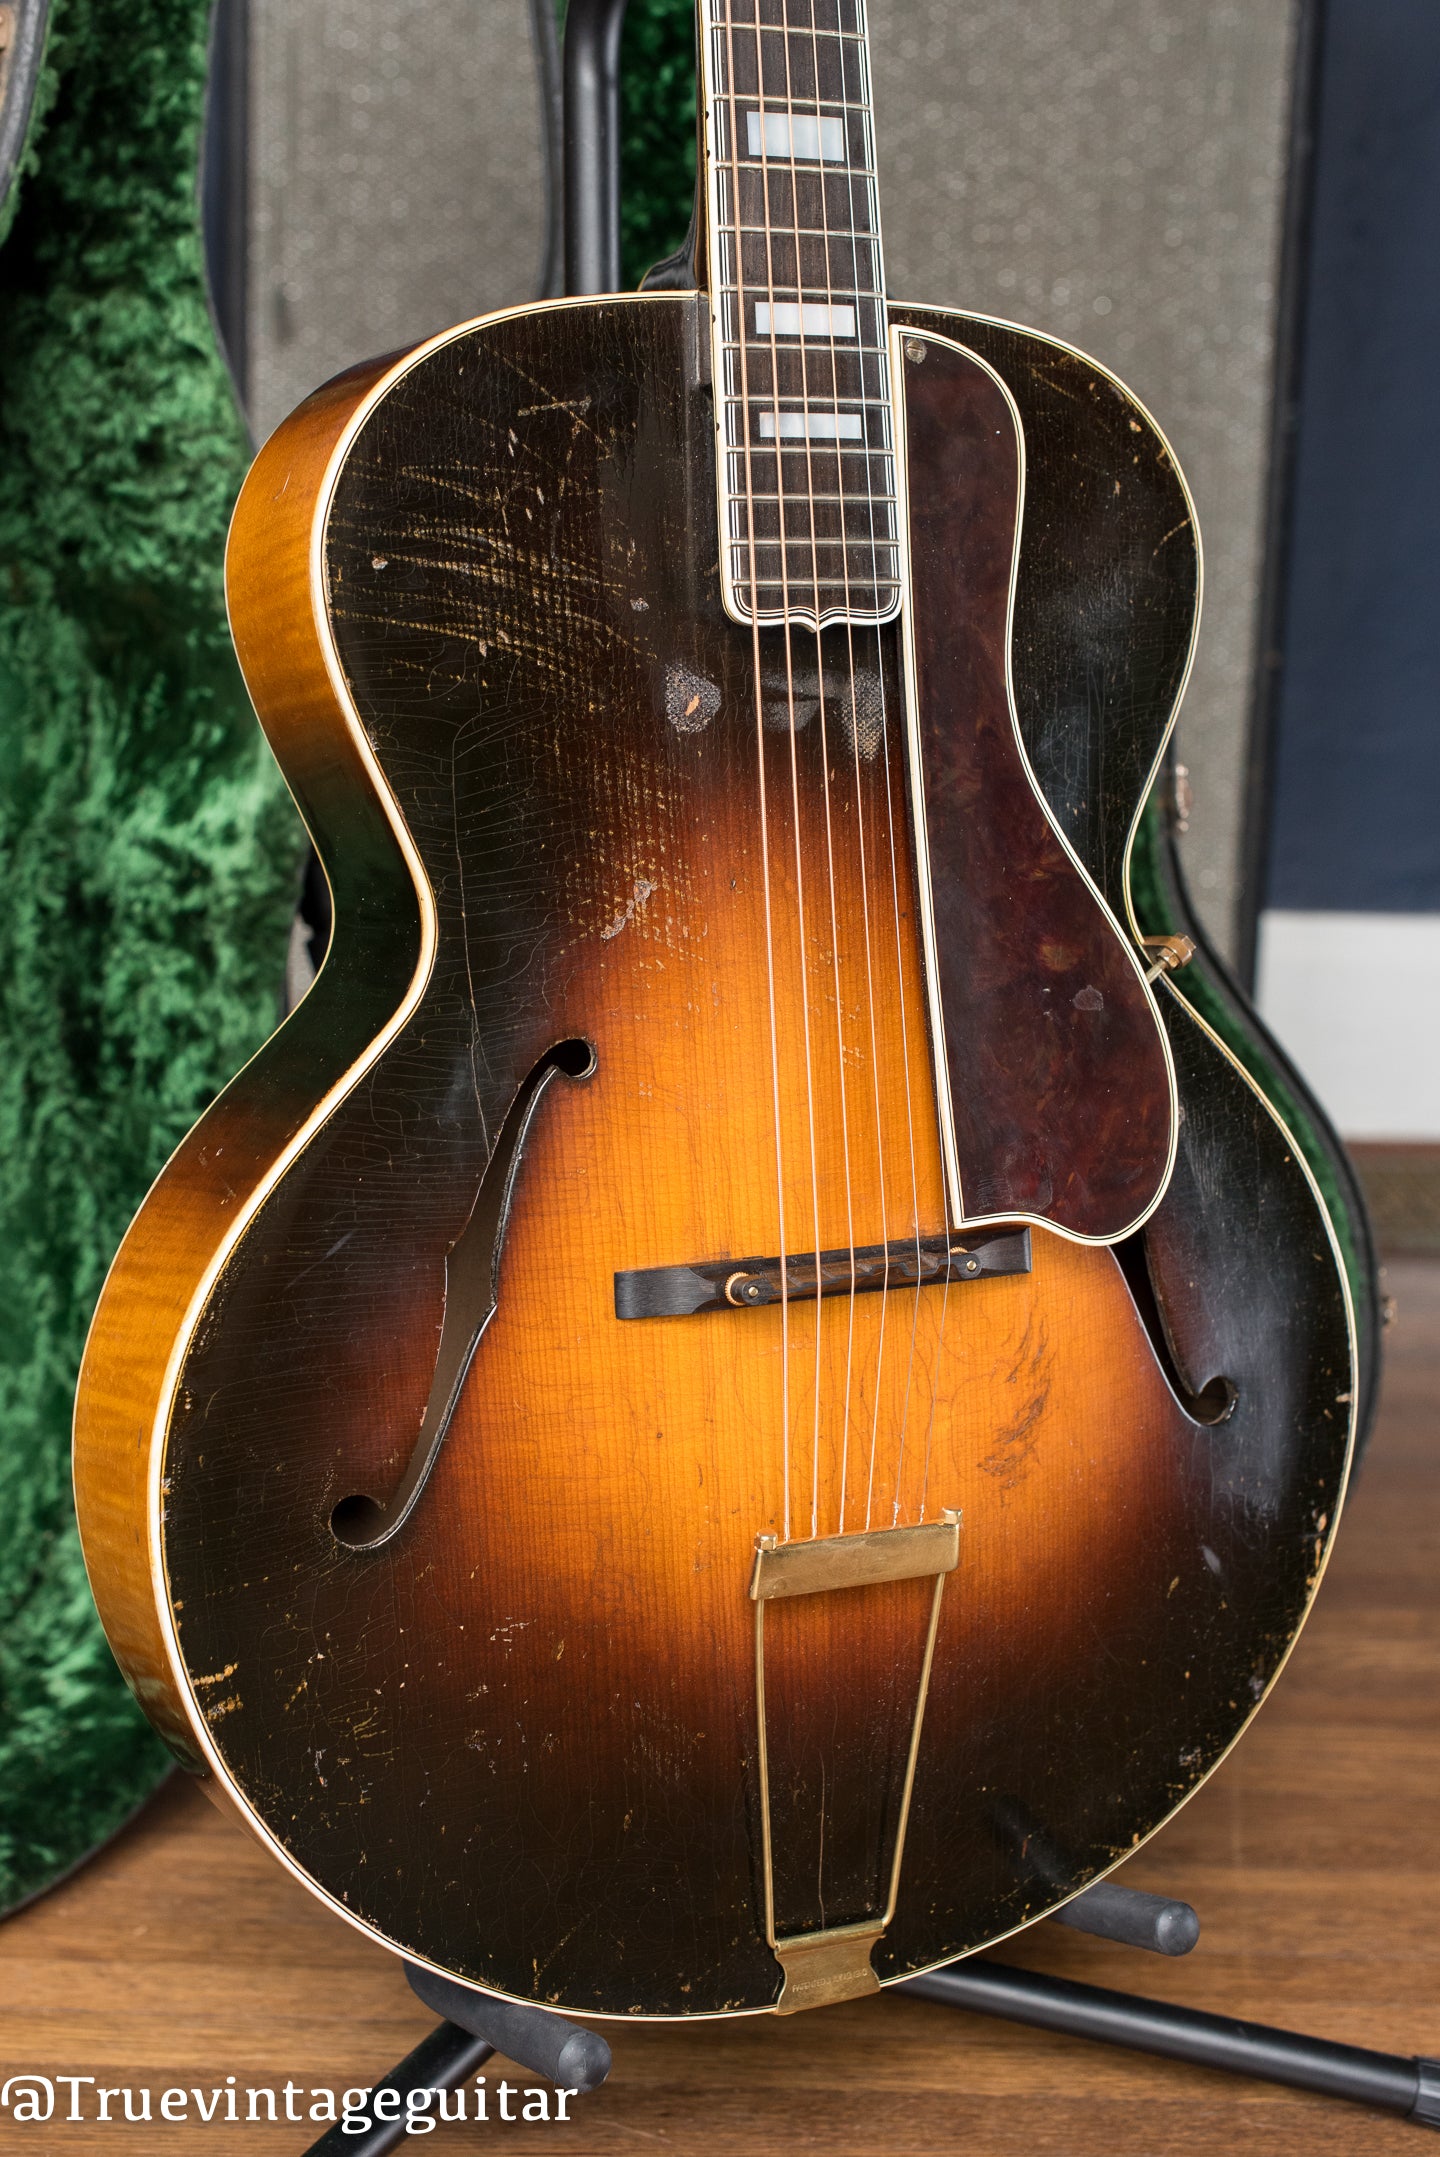 1931 Gibson L-5, 16"